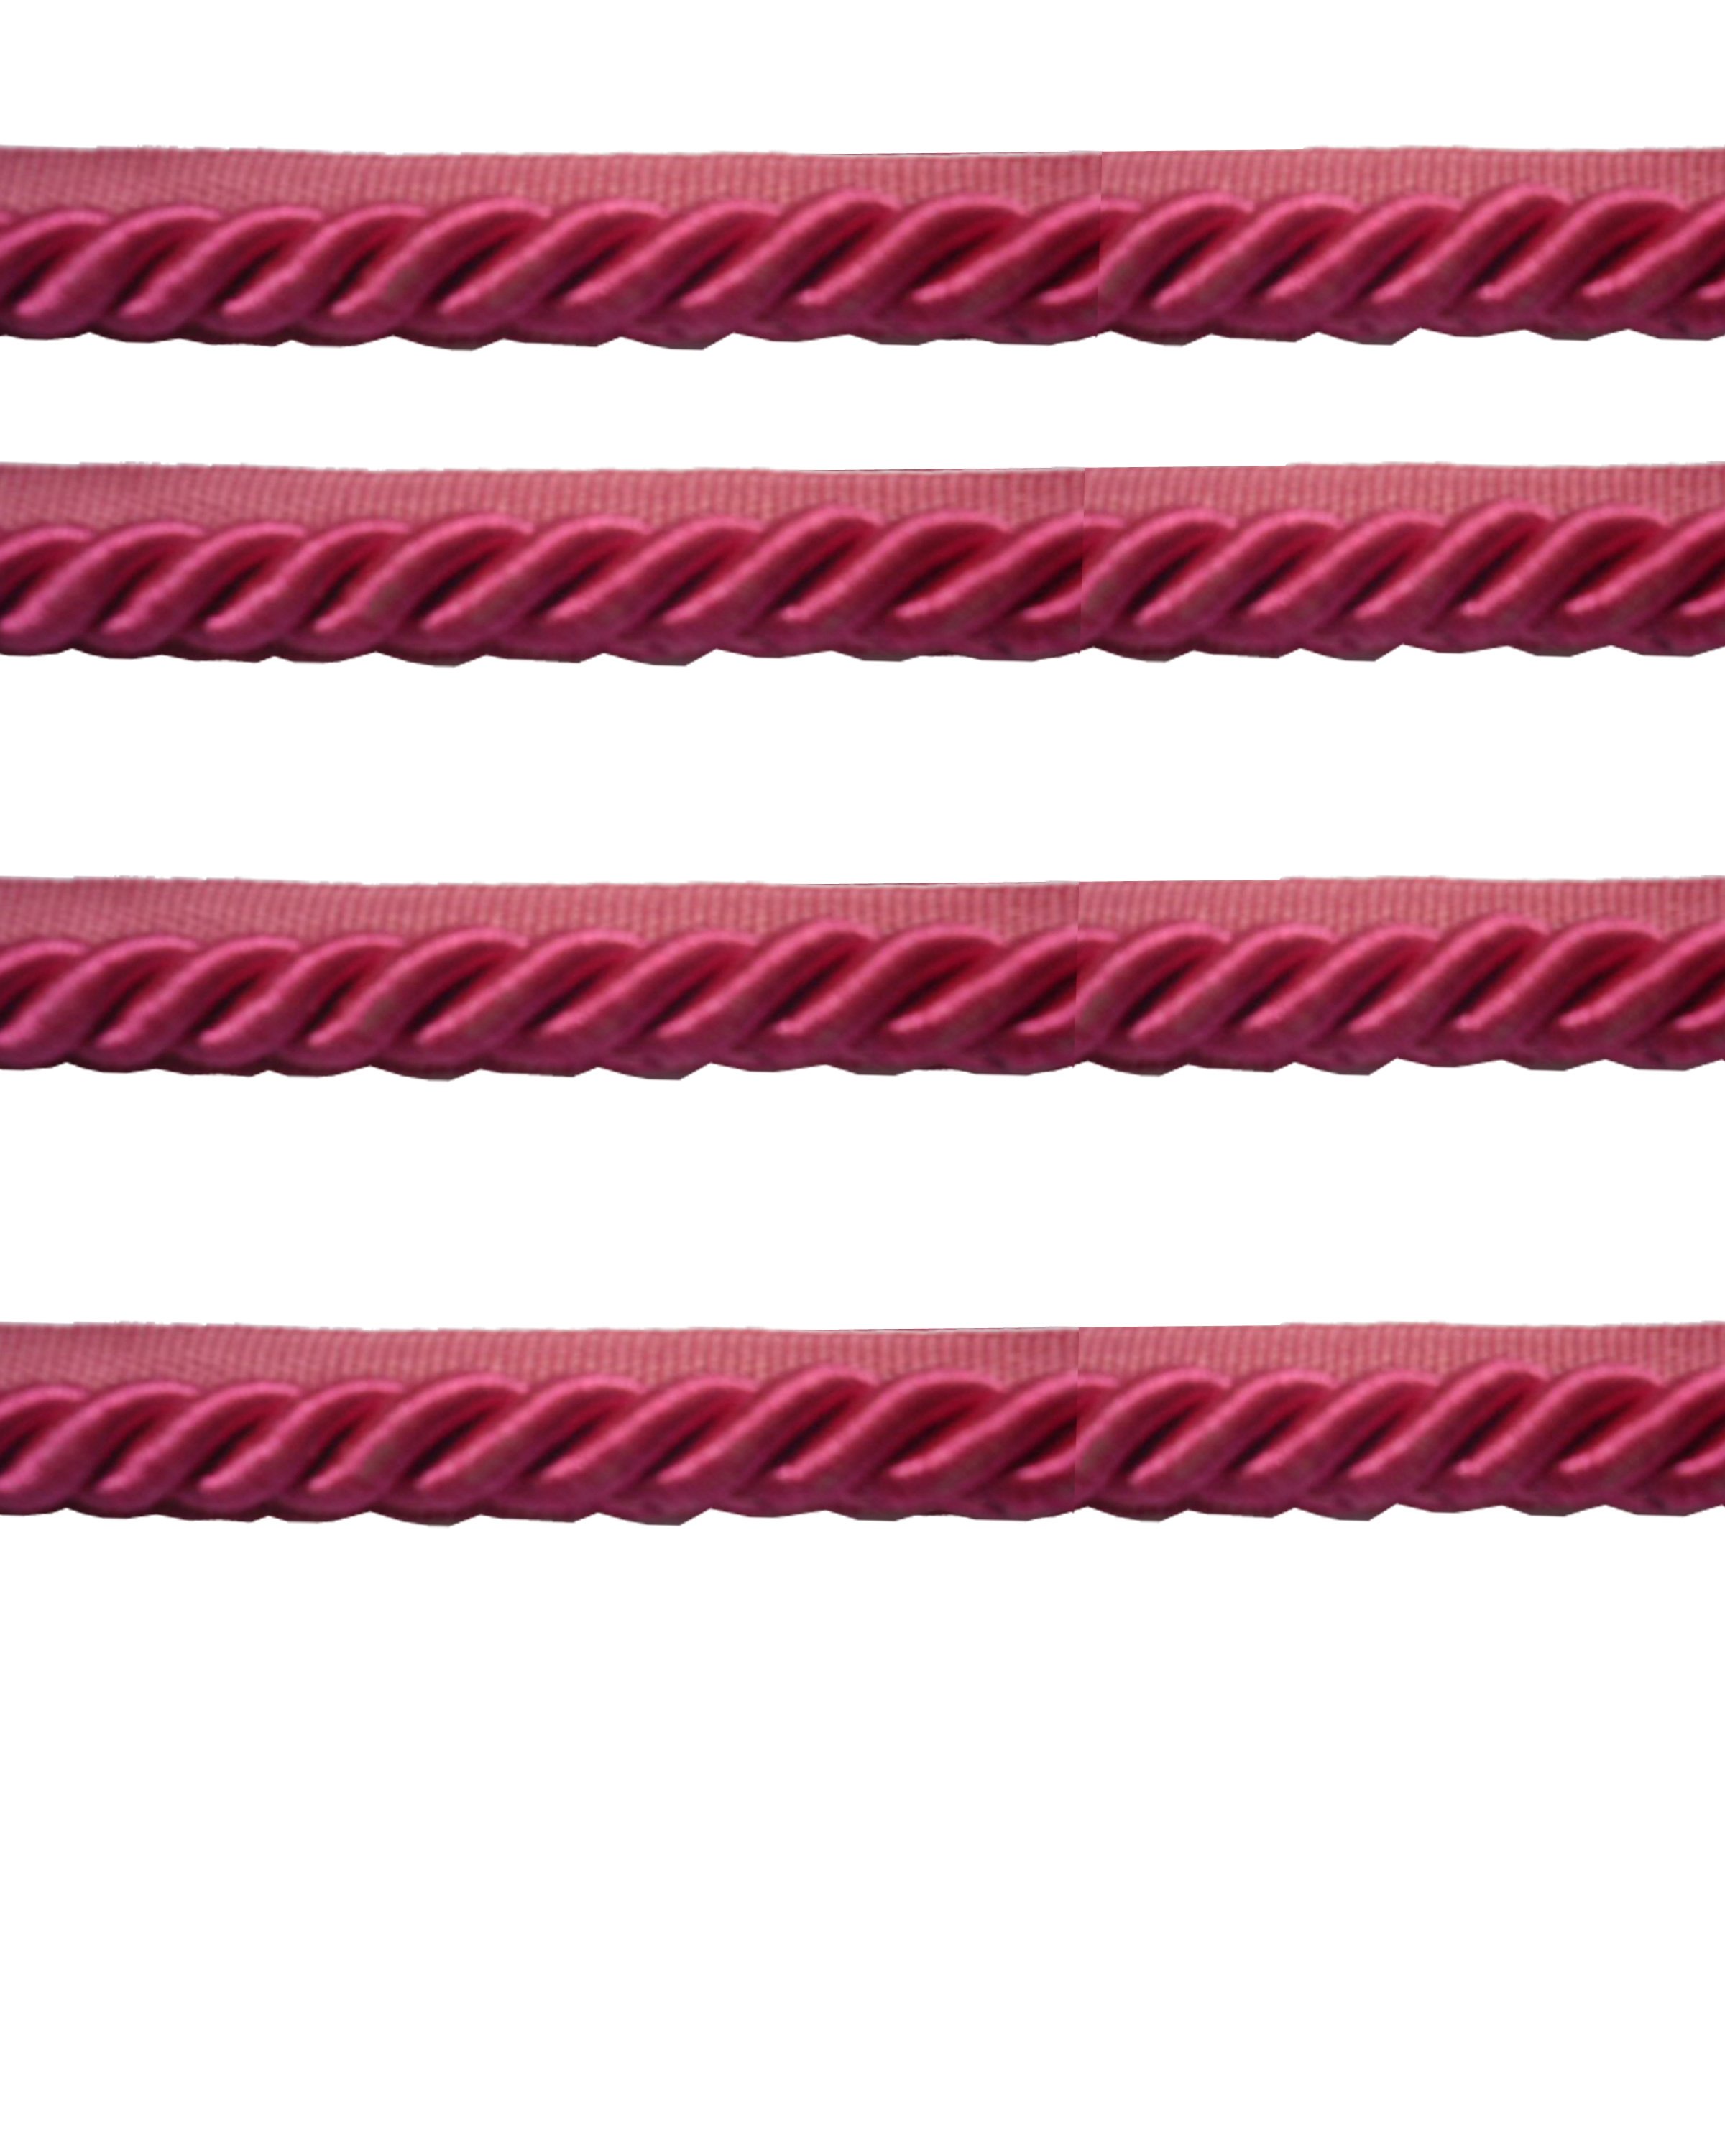 Piping Cord 8mm on Tape - Fuchsia Pink Price is for 5 metres